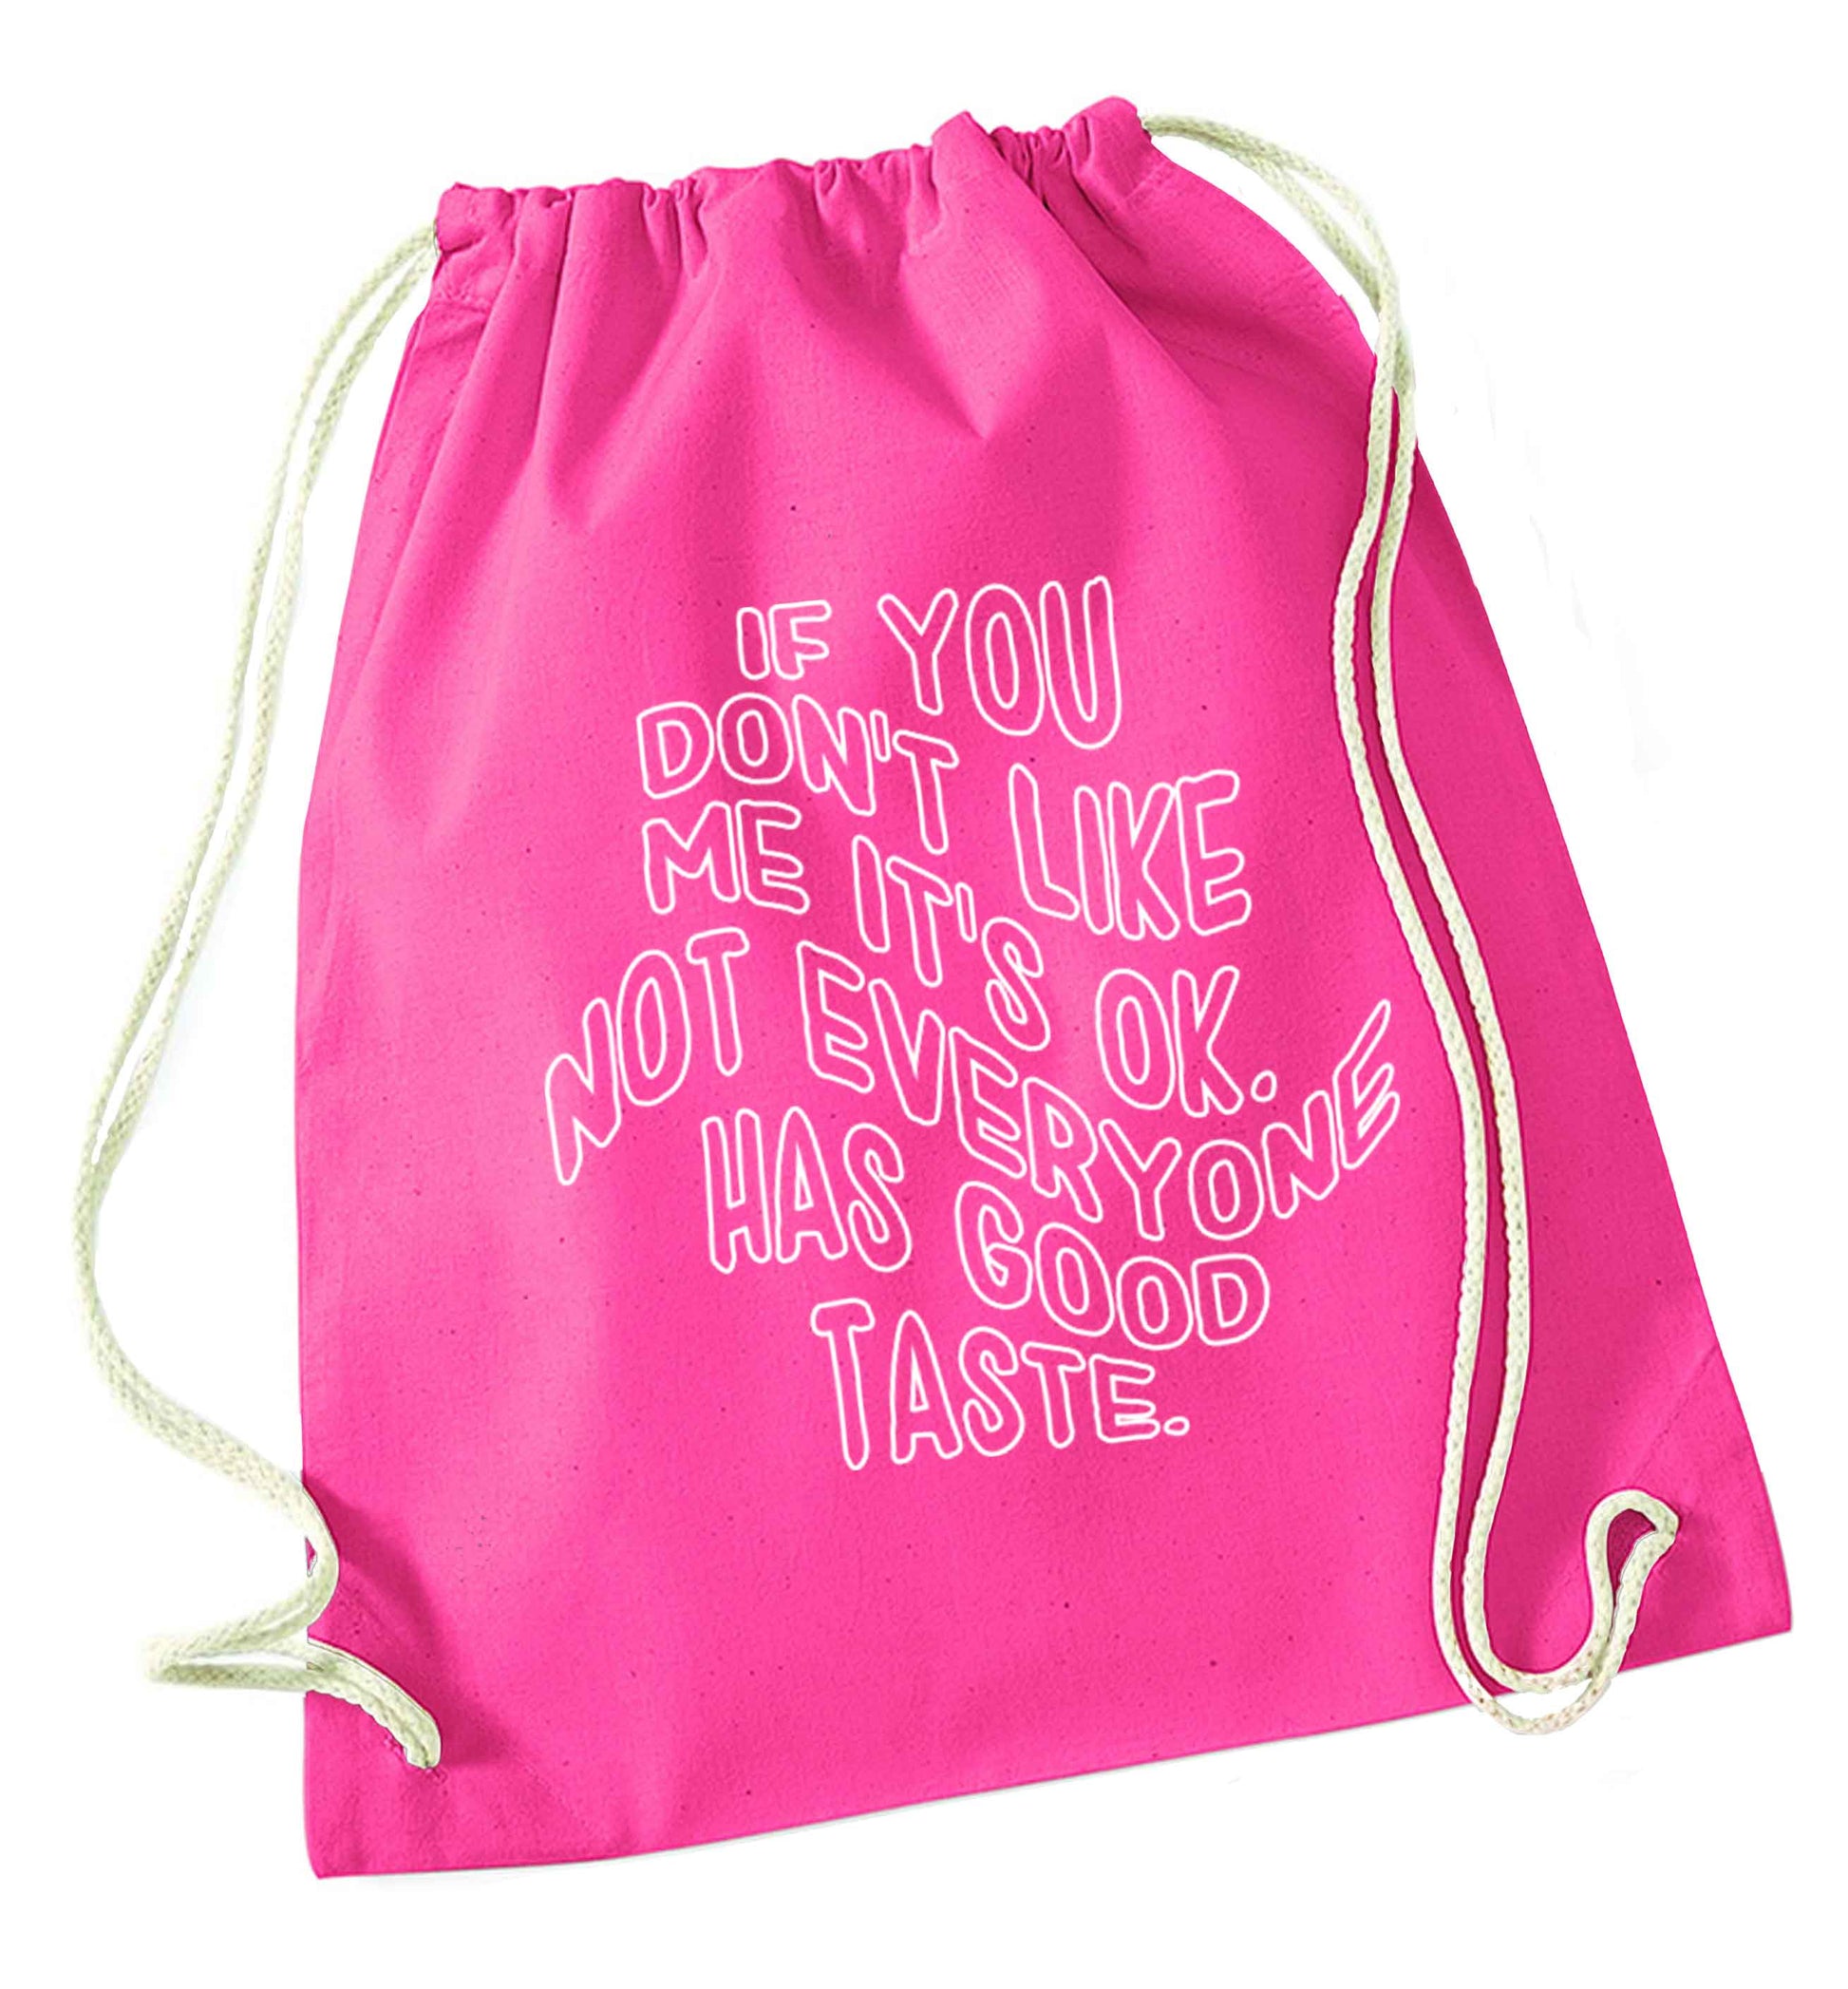 If you don't like me it's ok not everyone has good taste pink drawstring bag